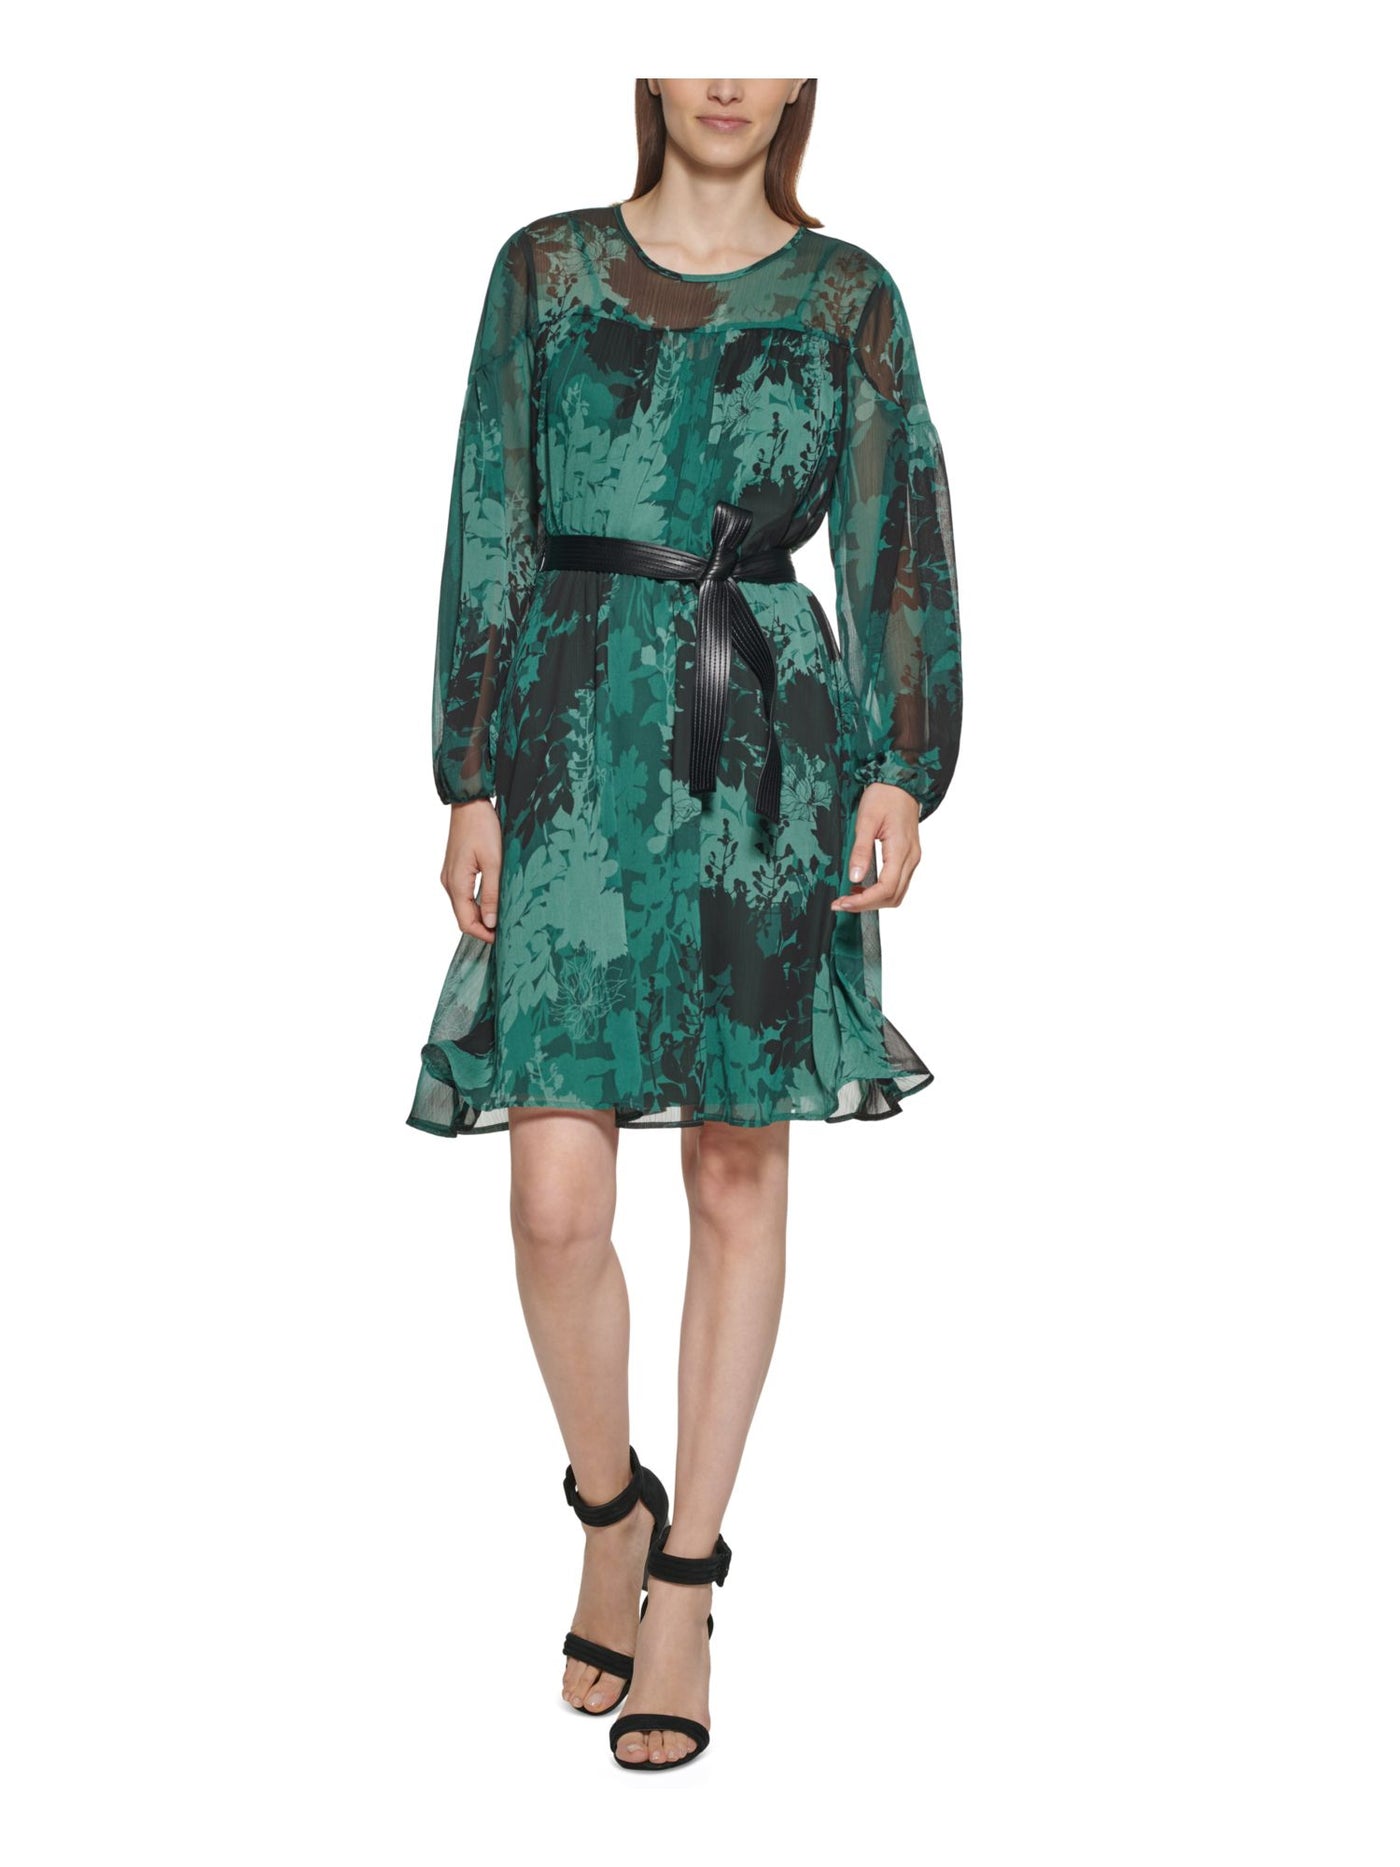 CALVIN KLEIN Womens Green Belted Lined Floral Long Sleeve Round Neck Above The Knee Cocktail Shift Dress Petites 8P